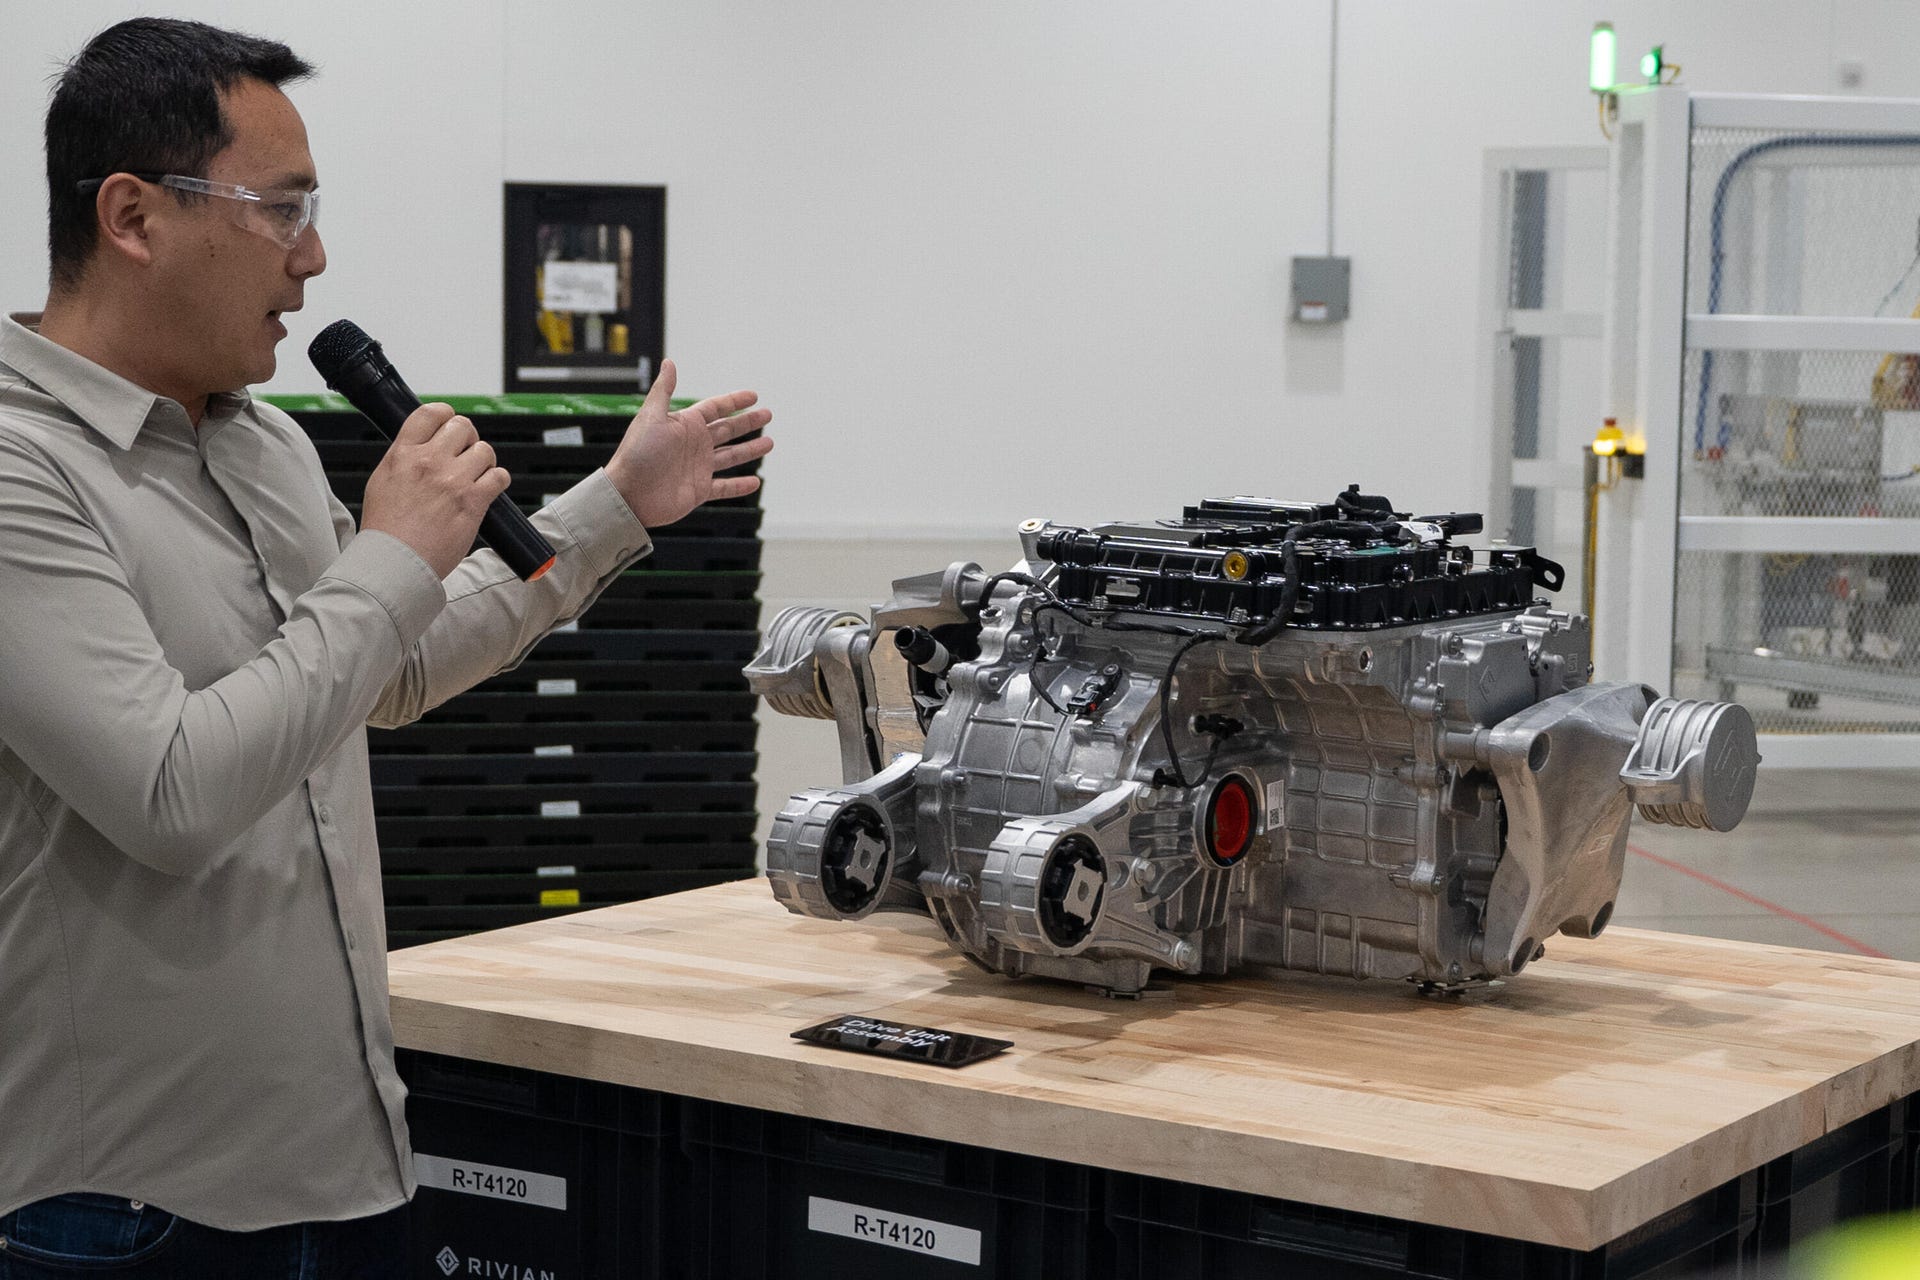 Rivian engineer presents the Enduro electric drive unit